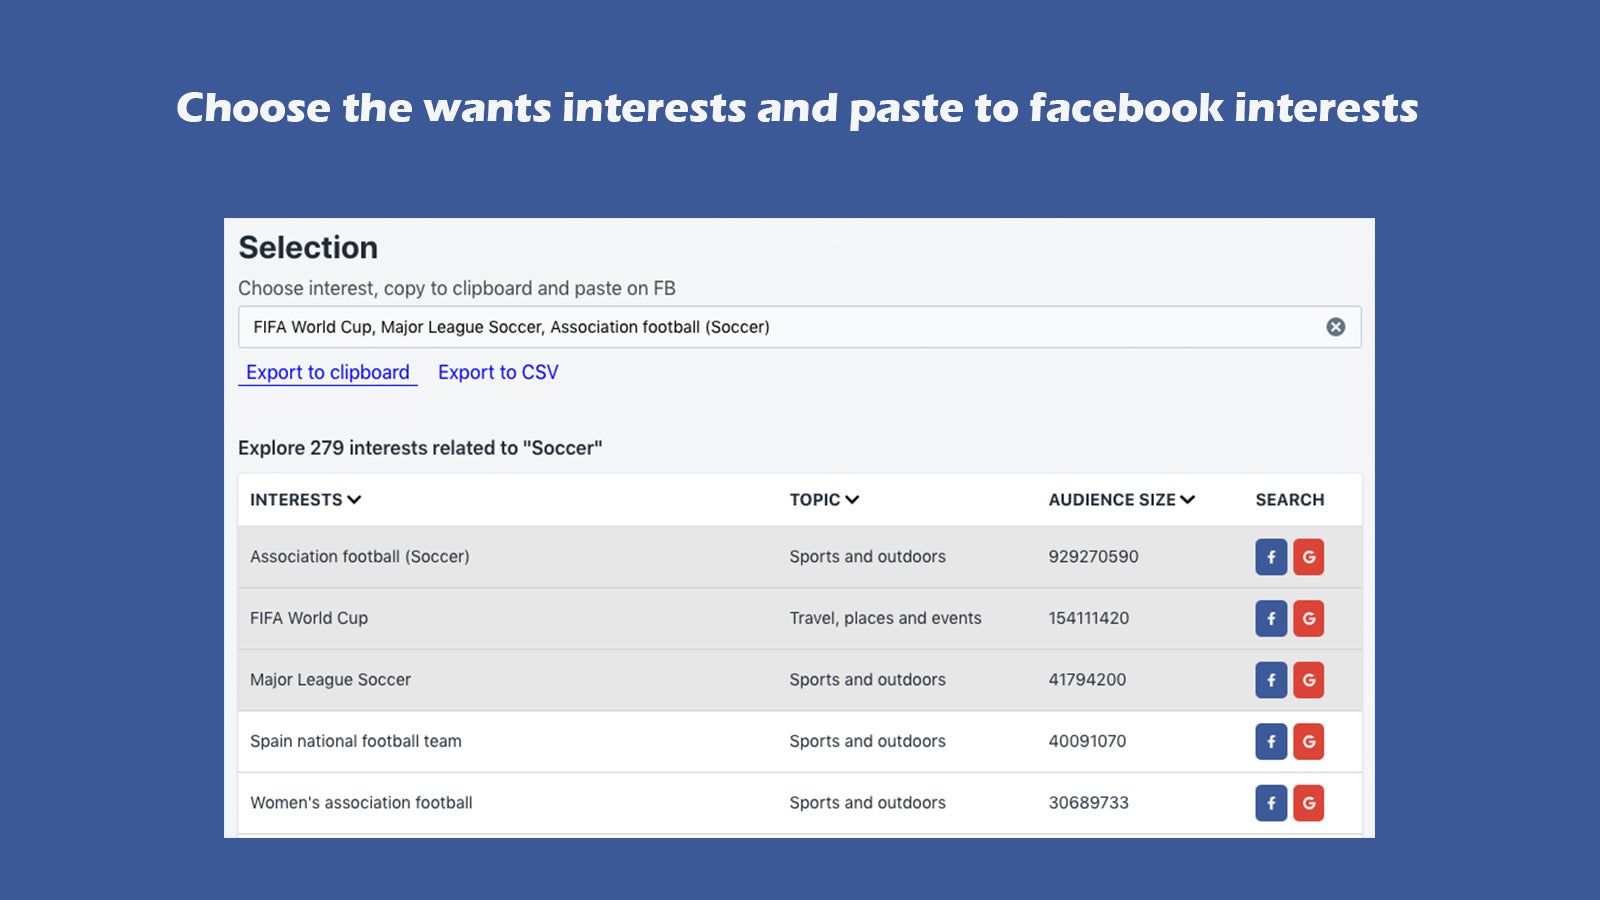 Copy & paste the interests to Facebook ads sets